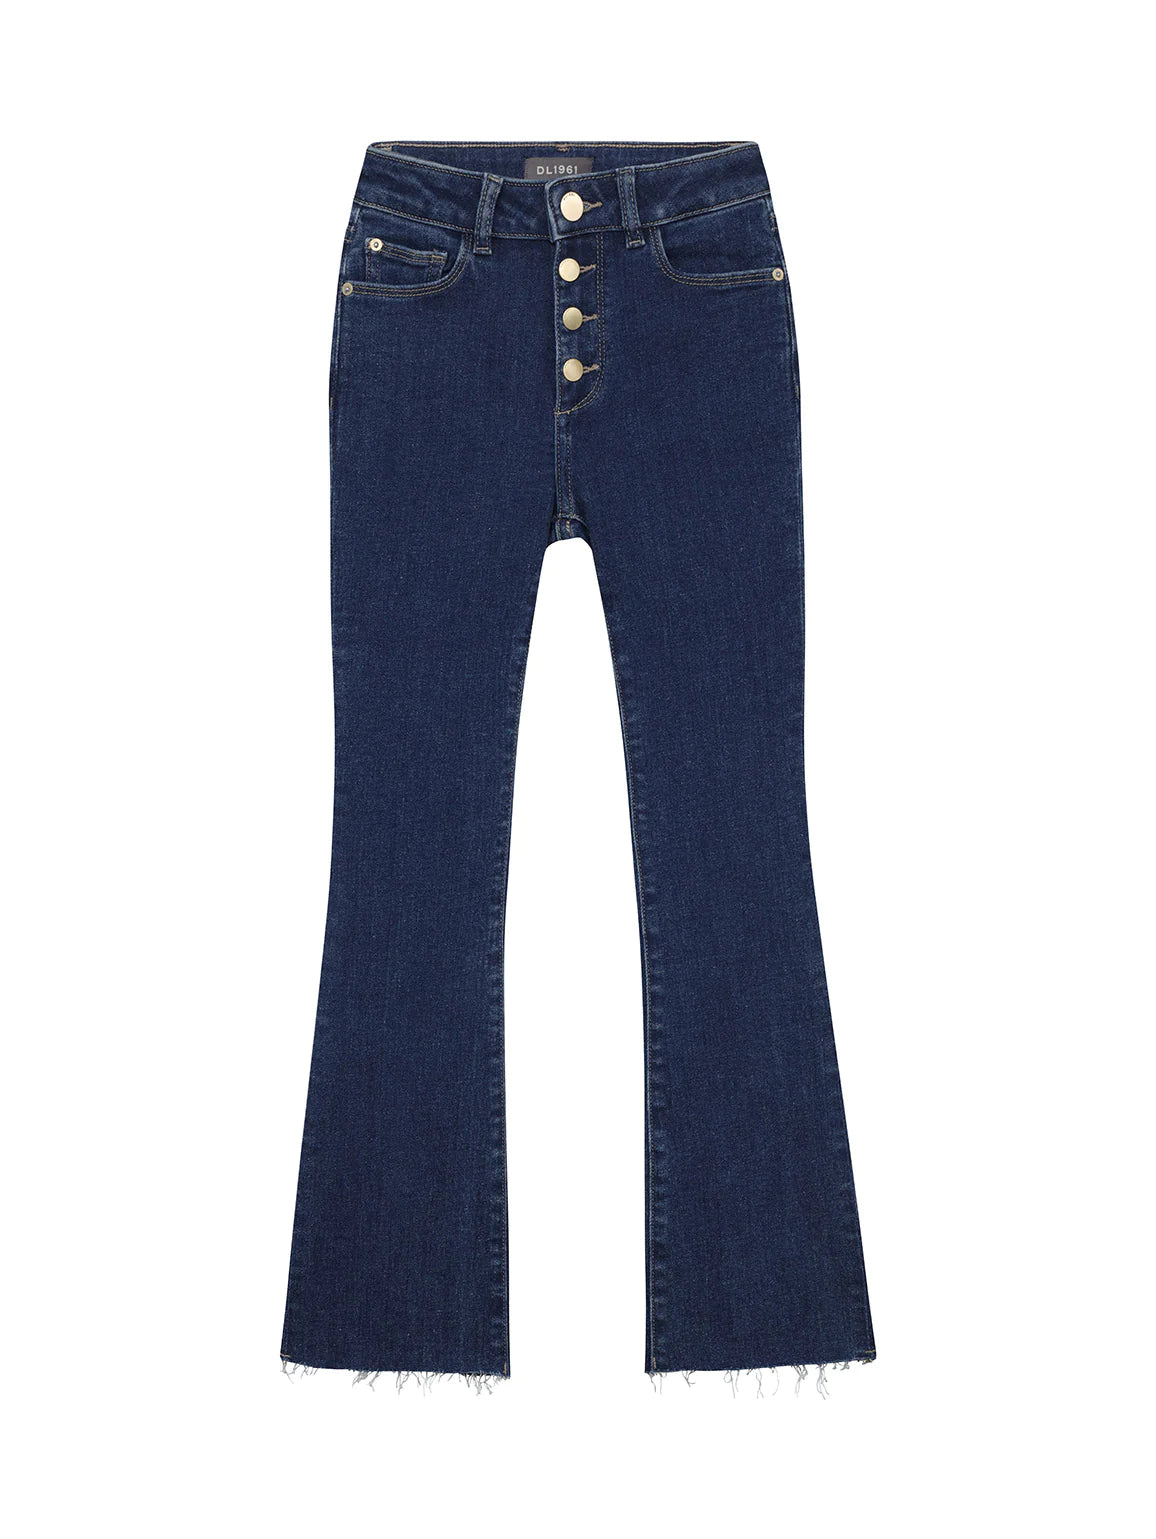 DL1961 Claire Bootcut High Rise Jeans